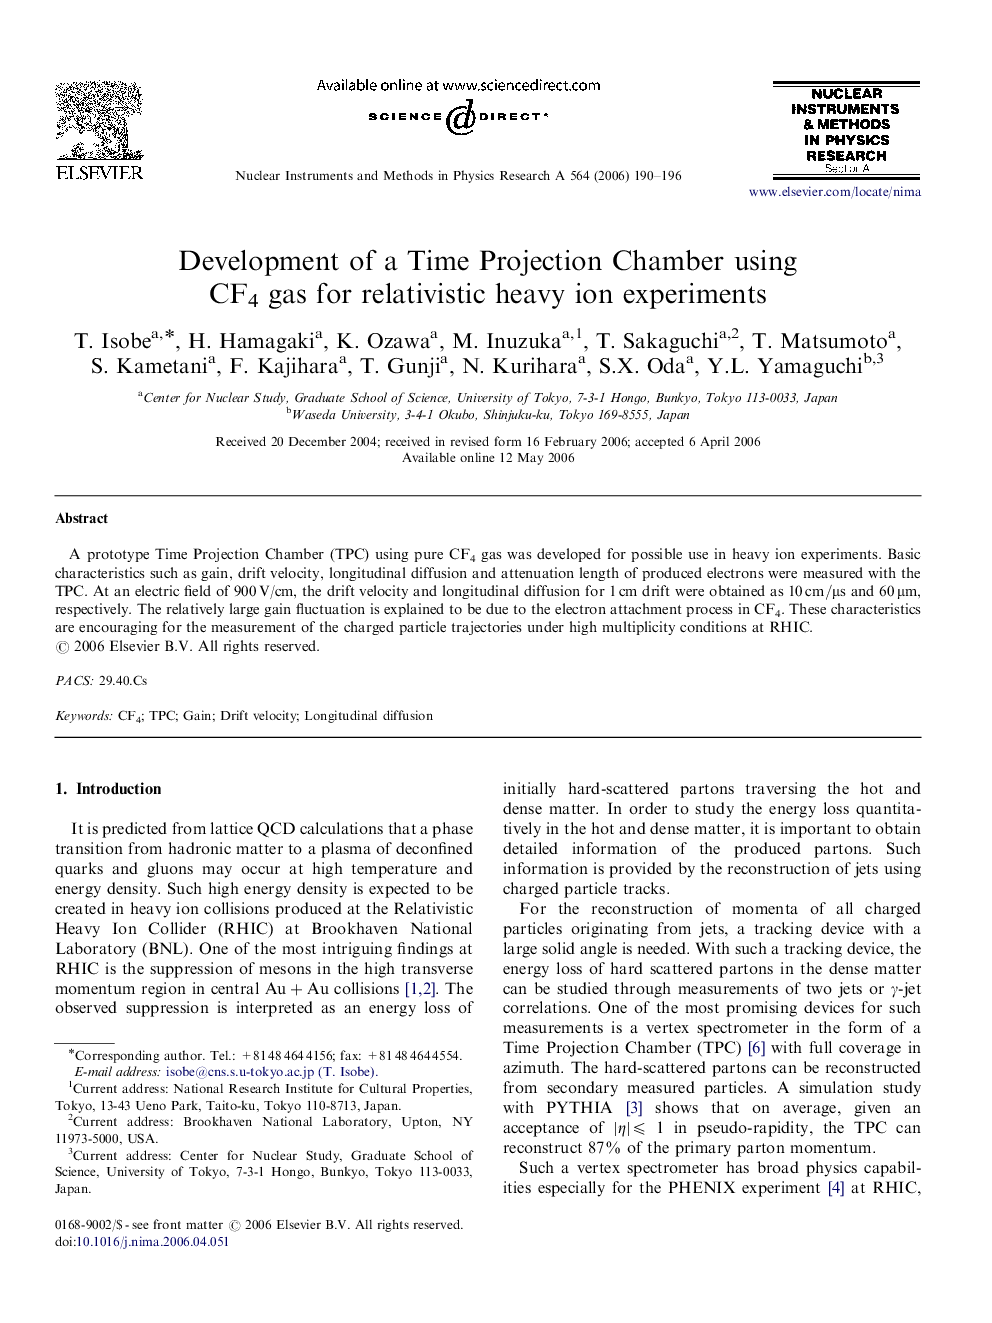 Development of a Time Projection Chamber using CF4 gas for relativistic heavy ion experiments